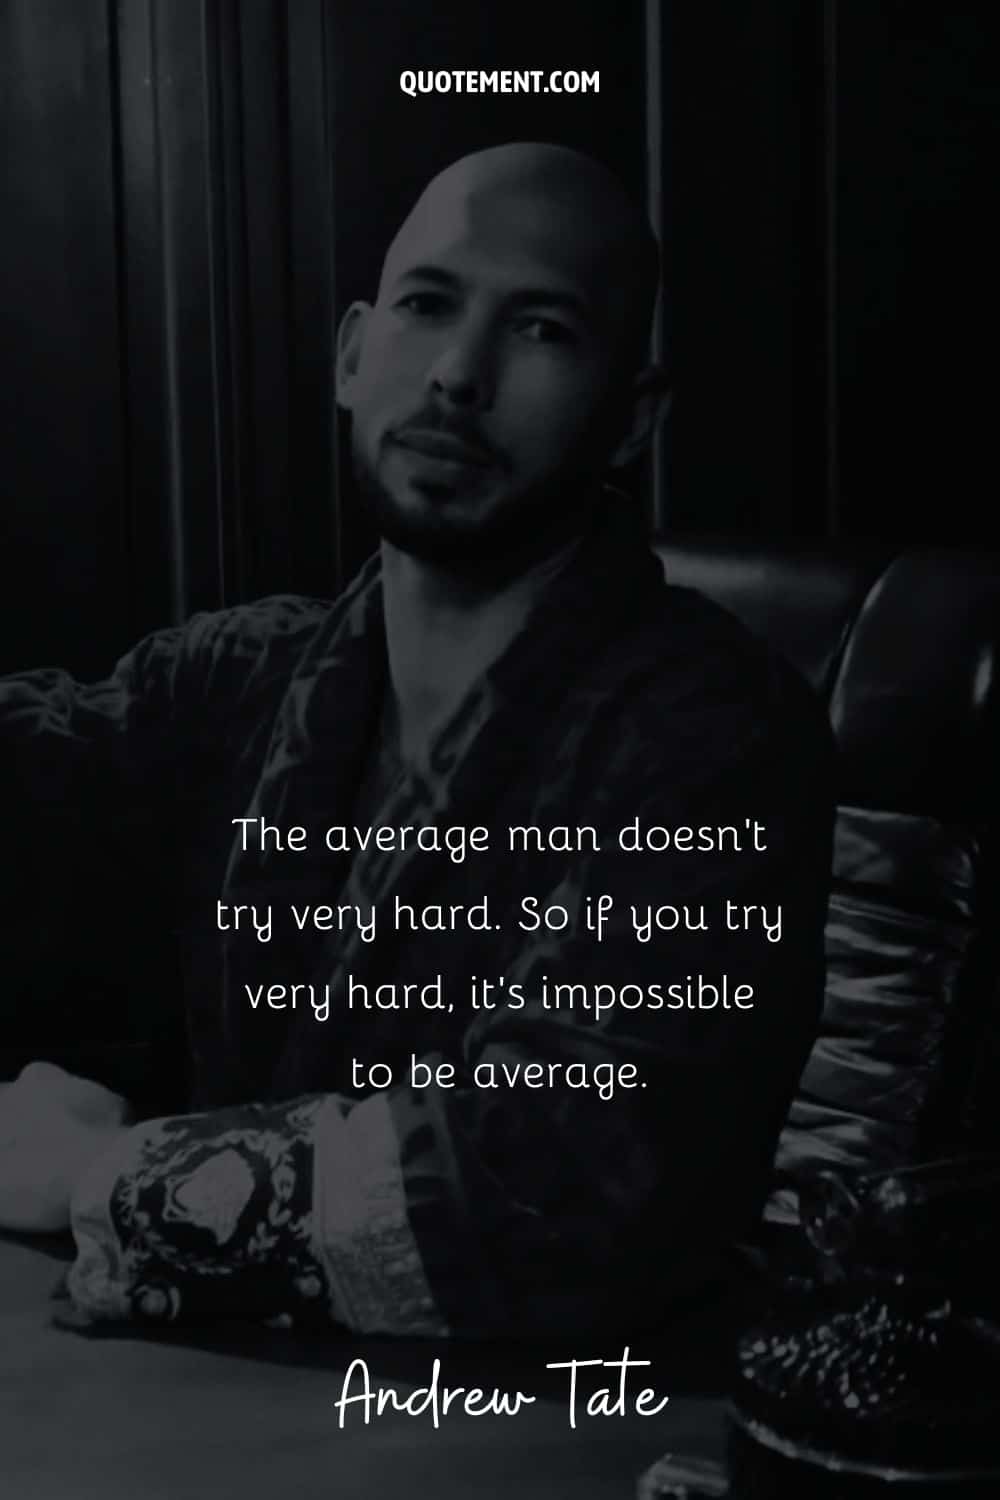 a handsome man representing andrew tate motivational quote